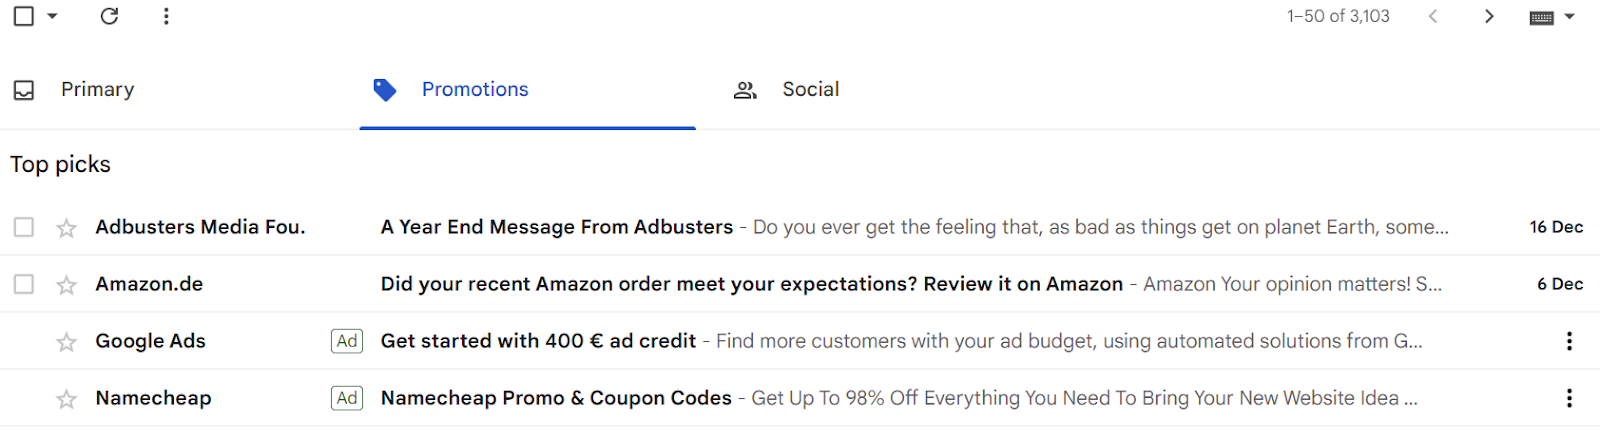 Google Ads Discovery Campaign result example in Gmail 